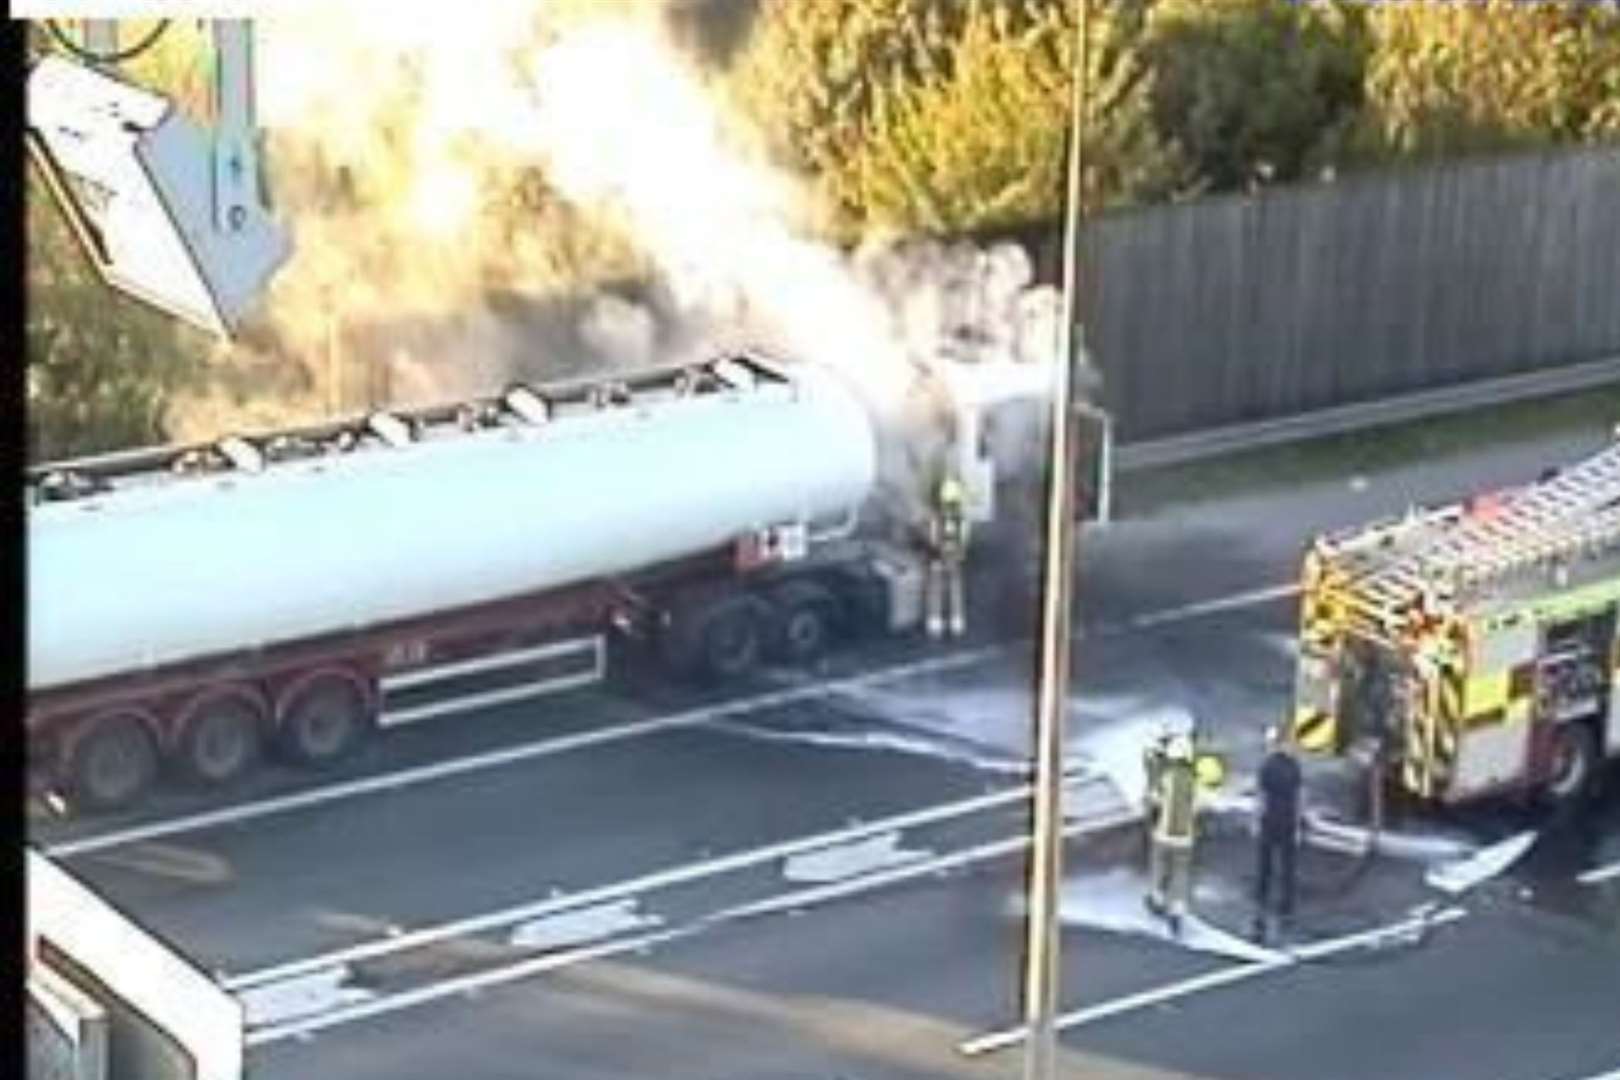 Traffic cameras showed the tanker on the M25. Picture: National Highways Twitter